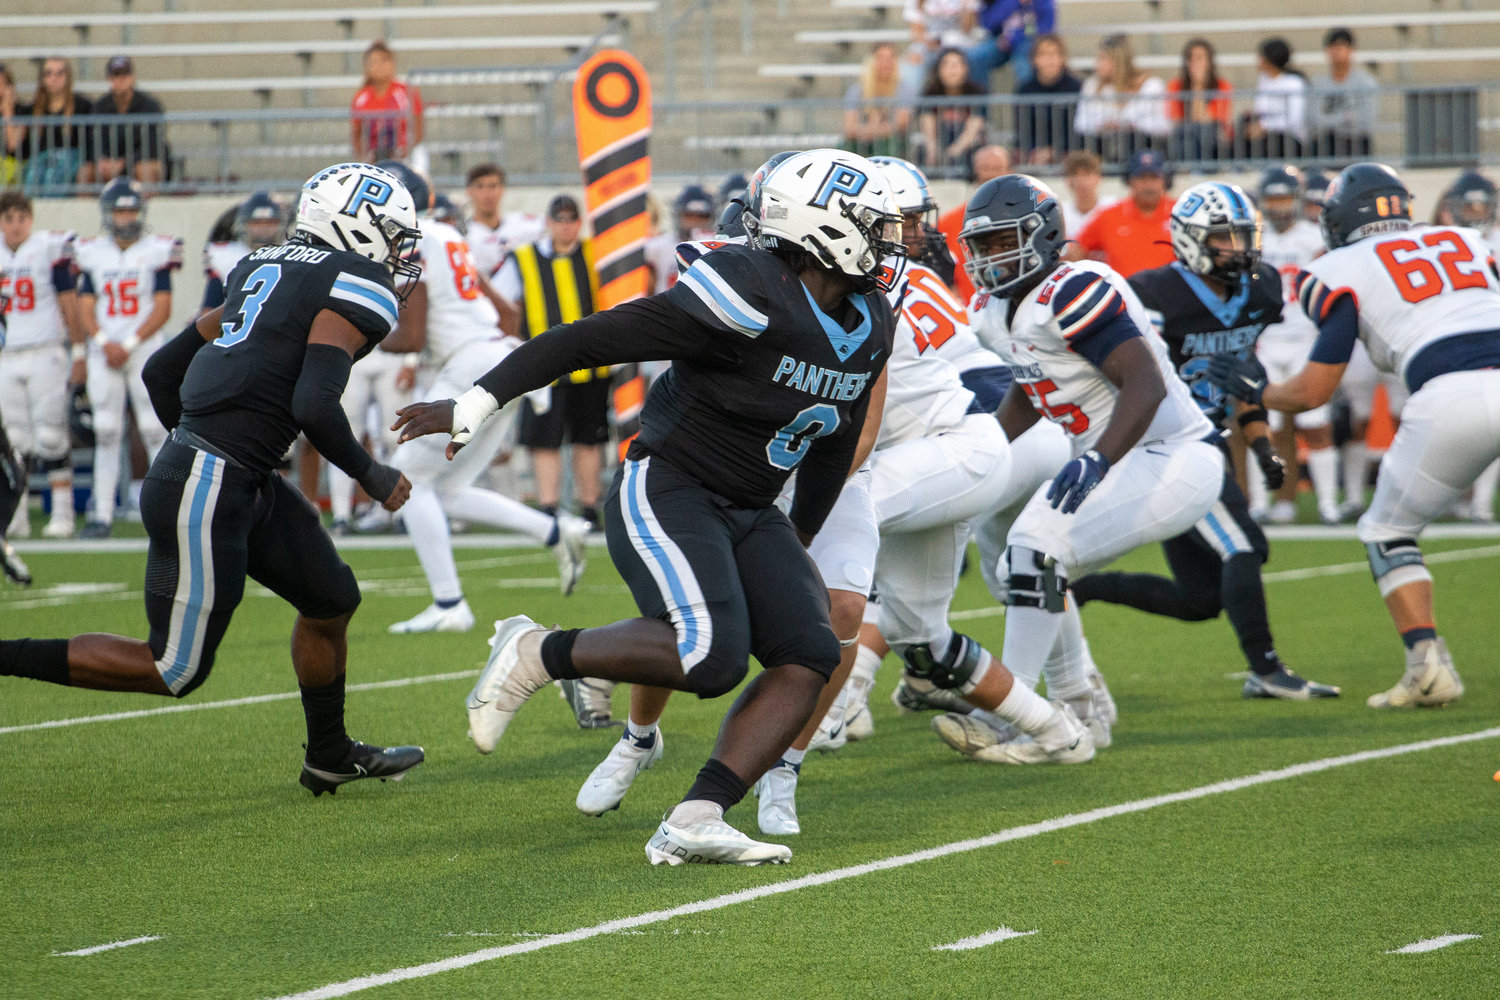 Paetow's D.J. Hicks fights through a blocker during Thursday's game between Paetow and Seven Lakes at Legacy Stadium.